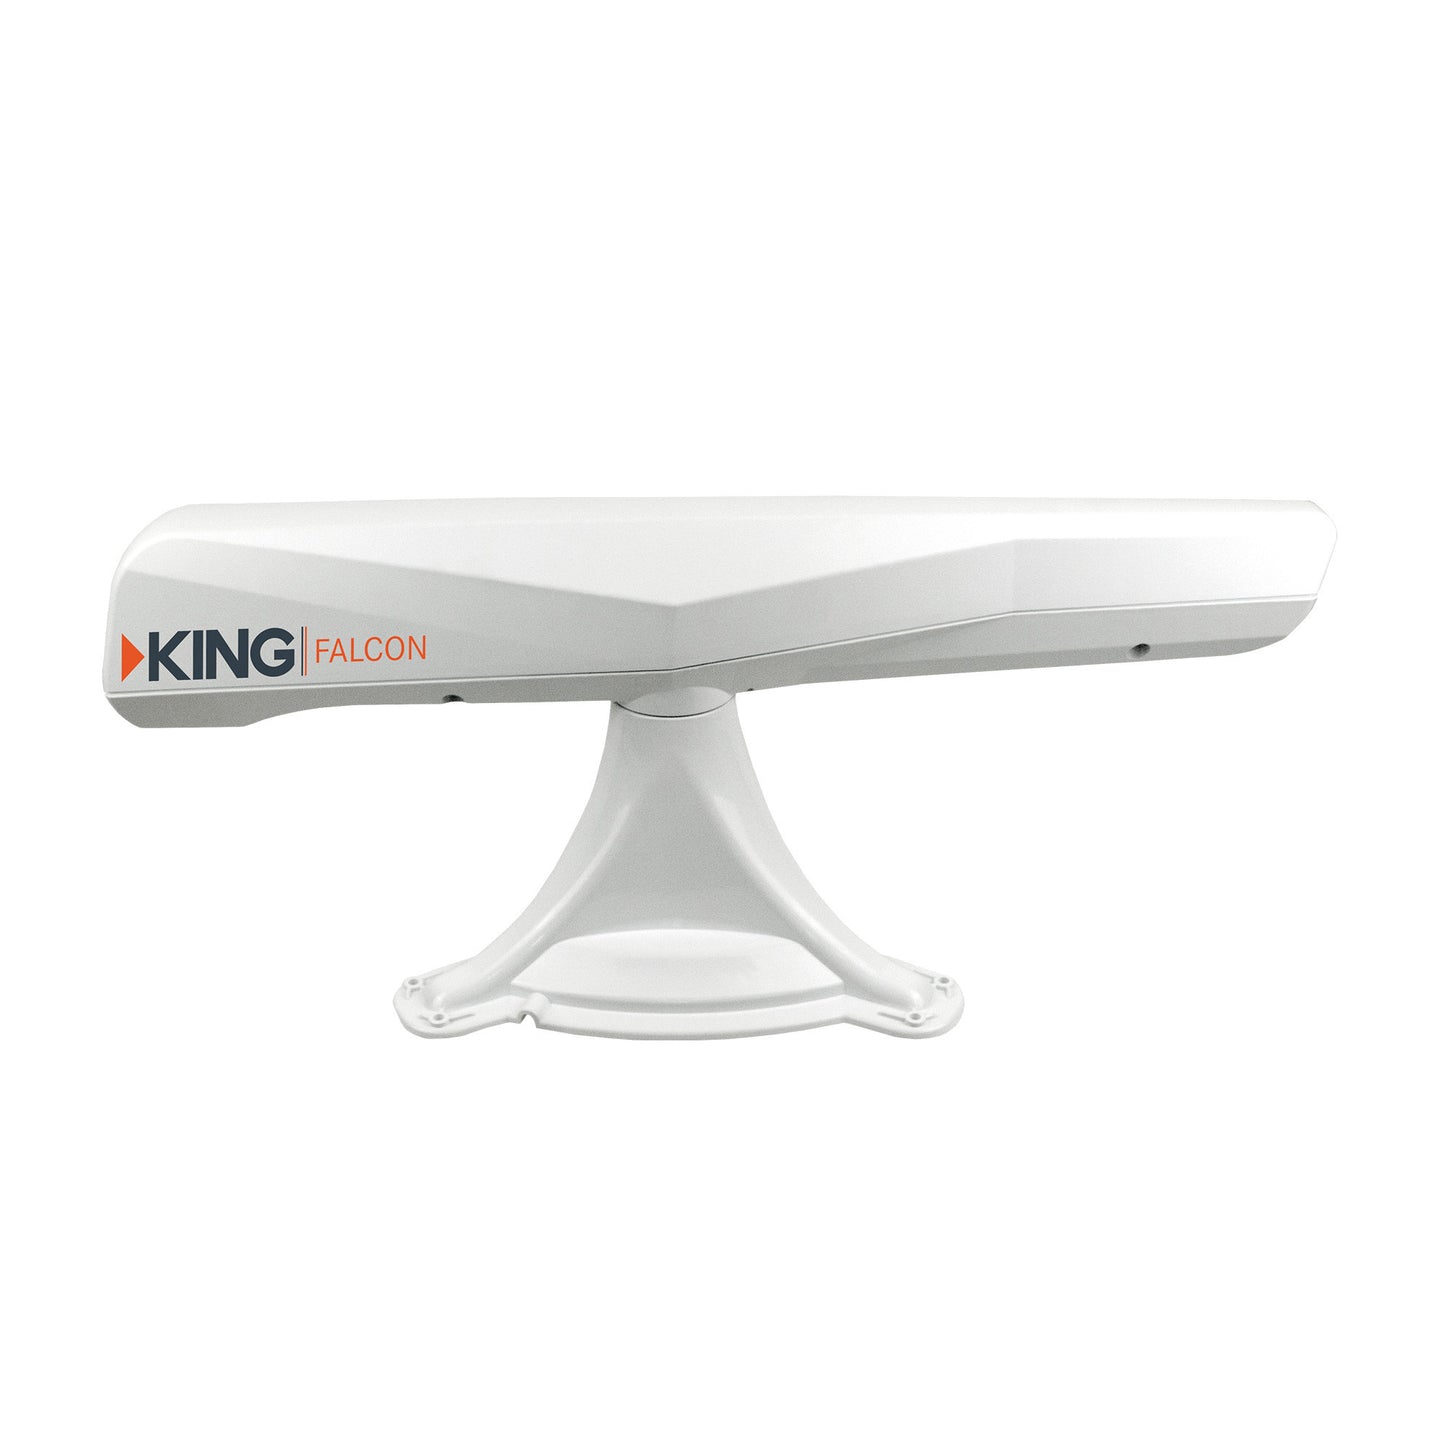 KING White Falcon Stationary Automatic Directional Wi-Fi Antenna & WiFiMax Router/Range Extender - 15-07651